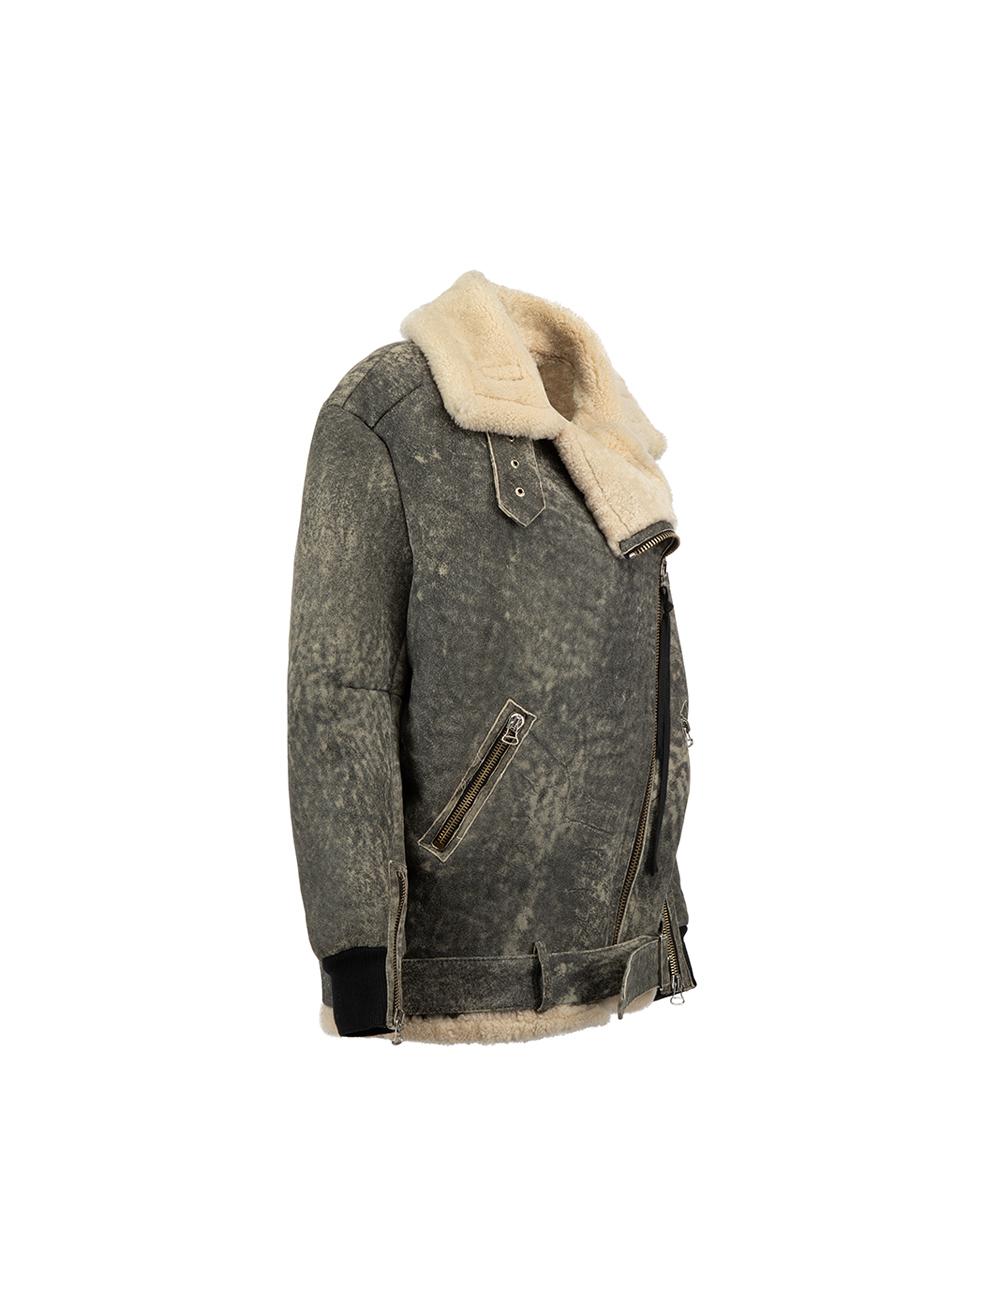 CONDITION is Very good. Minimal wear to jacket is evident. Minimal wear to shealing however some loose thread ends around hardware of this used Acne Studios designer resale item. 



Details


Grey

Shearling

Oversized biker jacket

Front